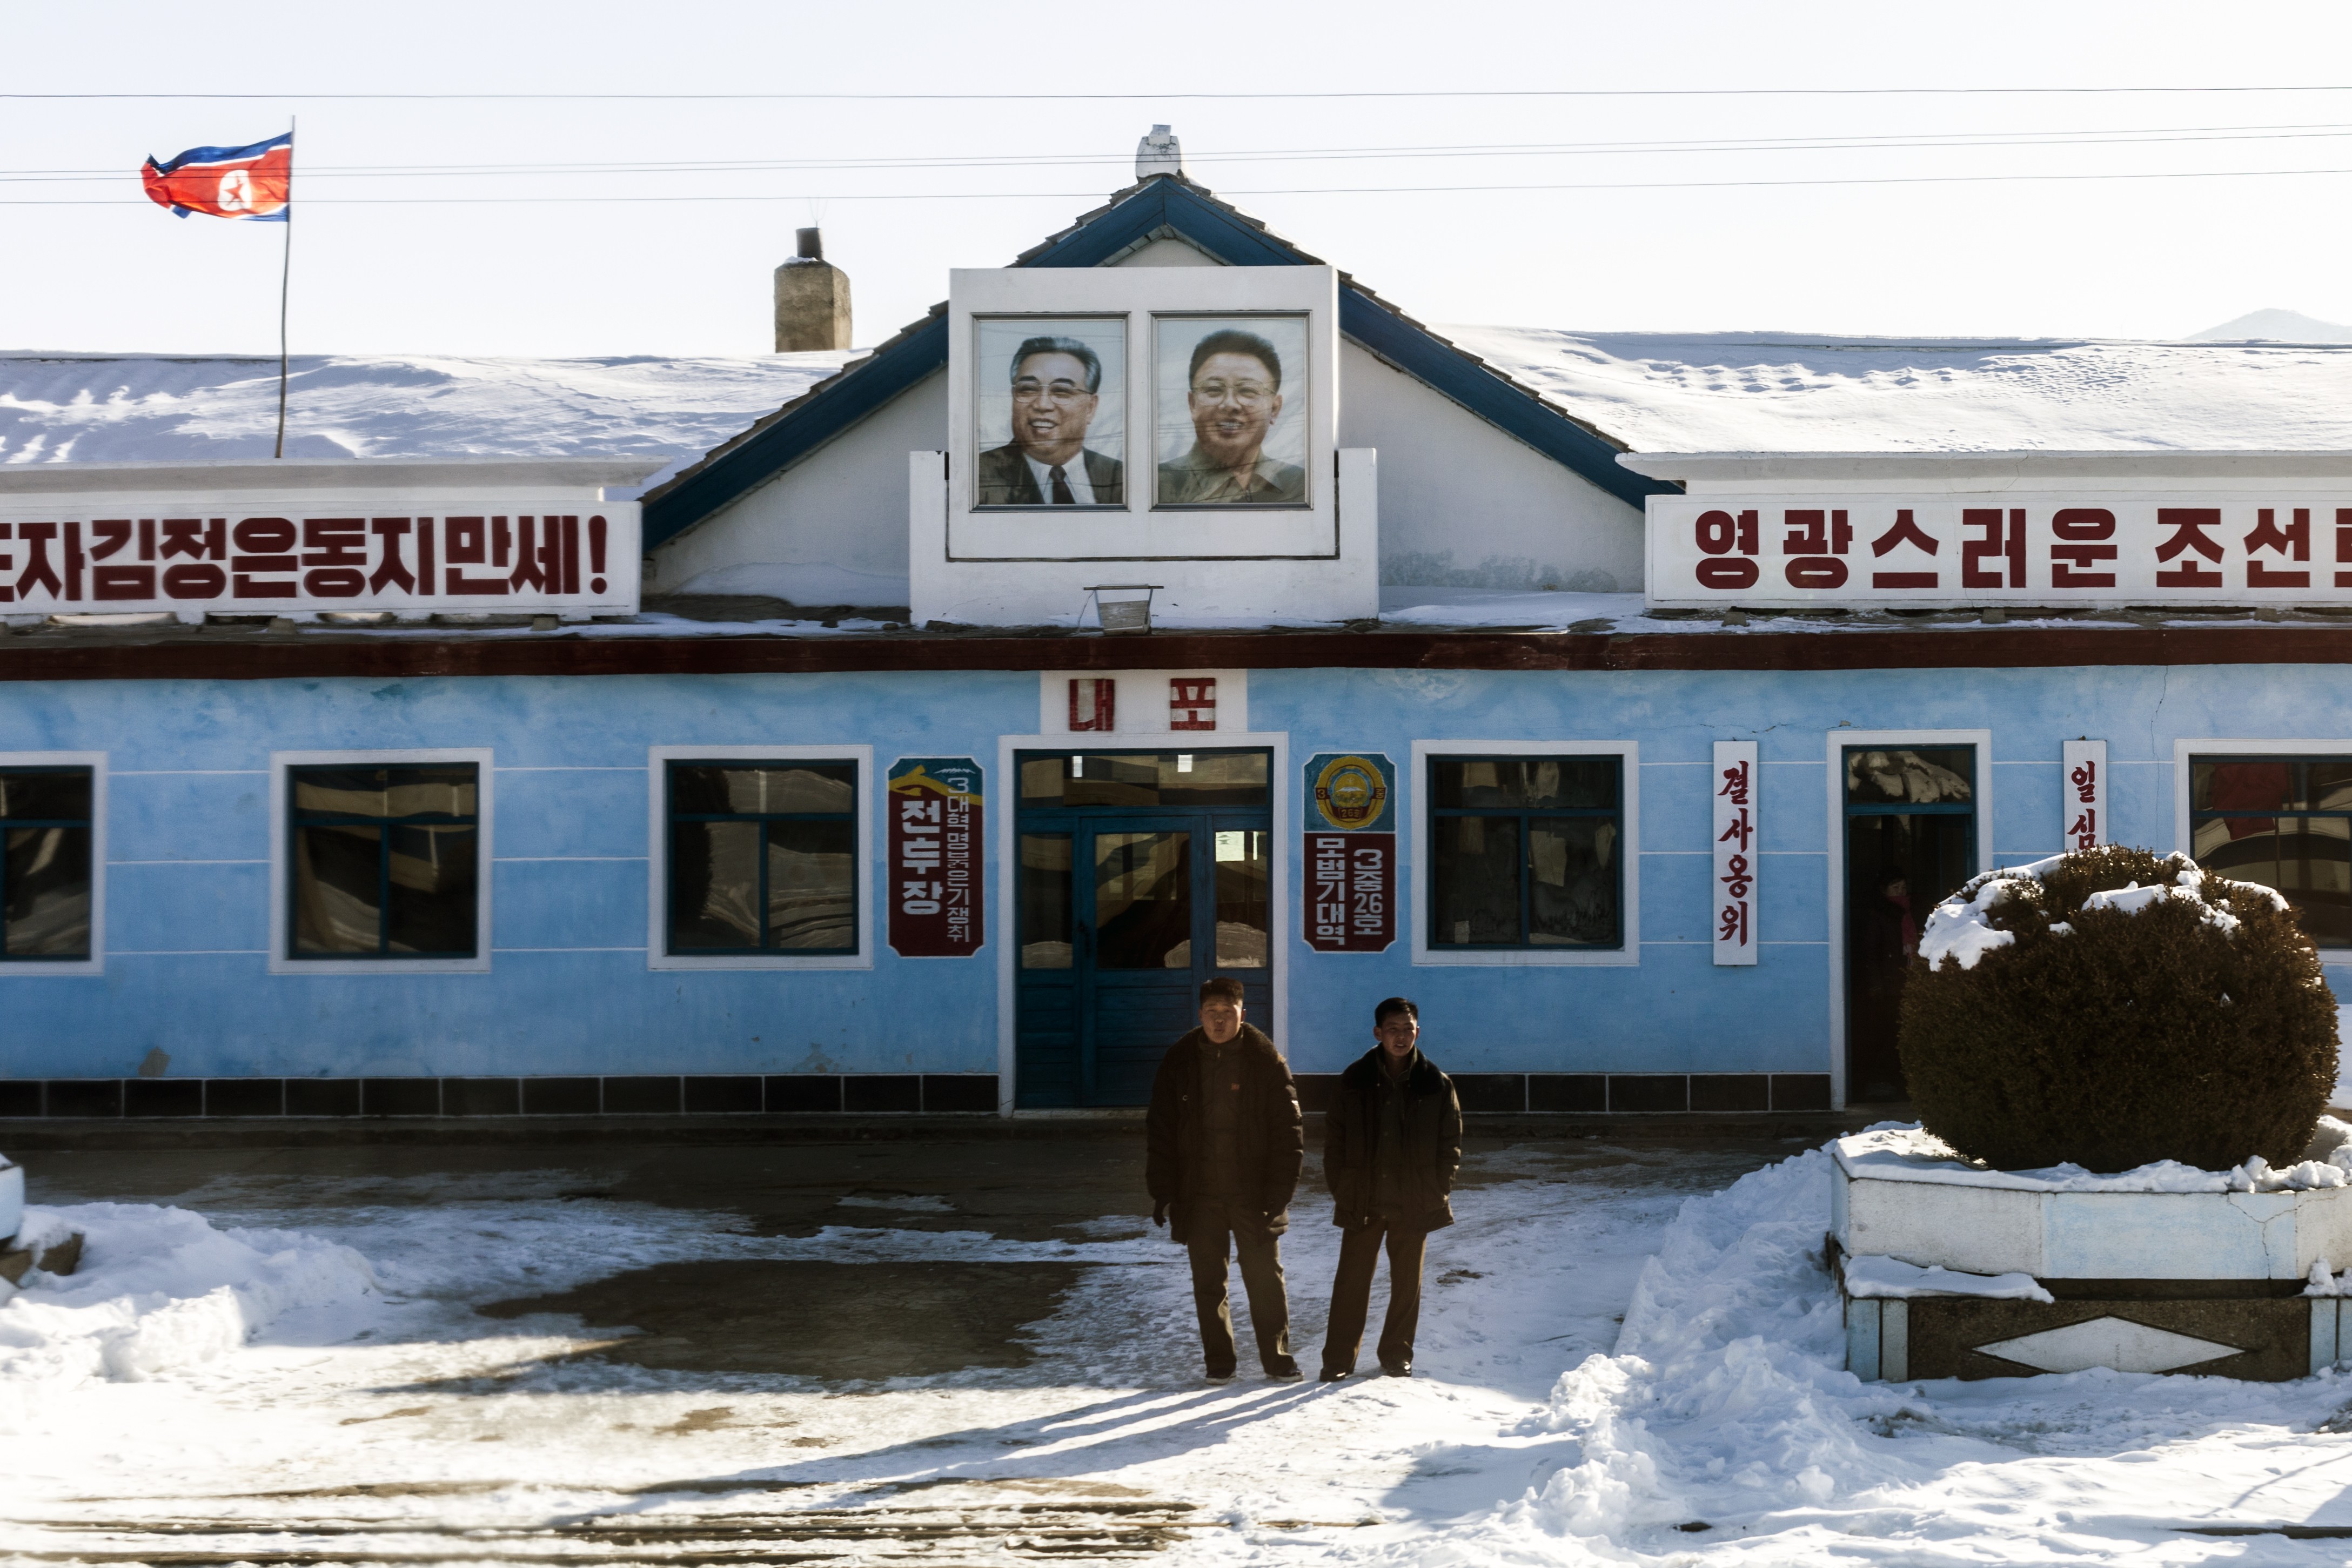 The 800km of railway from Pyongyang to Tumangang, near the point at which North Korea, China and Russia converge, has just opened to foreigners. Post Magazine boards the first train making the journey